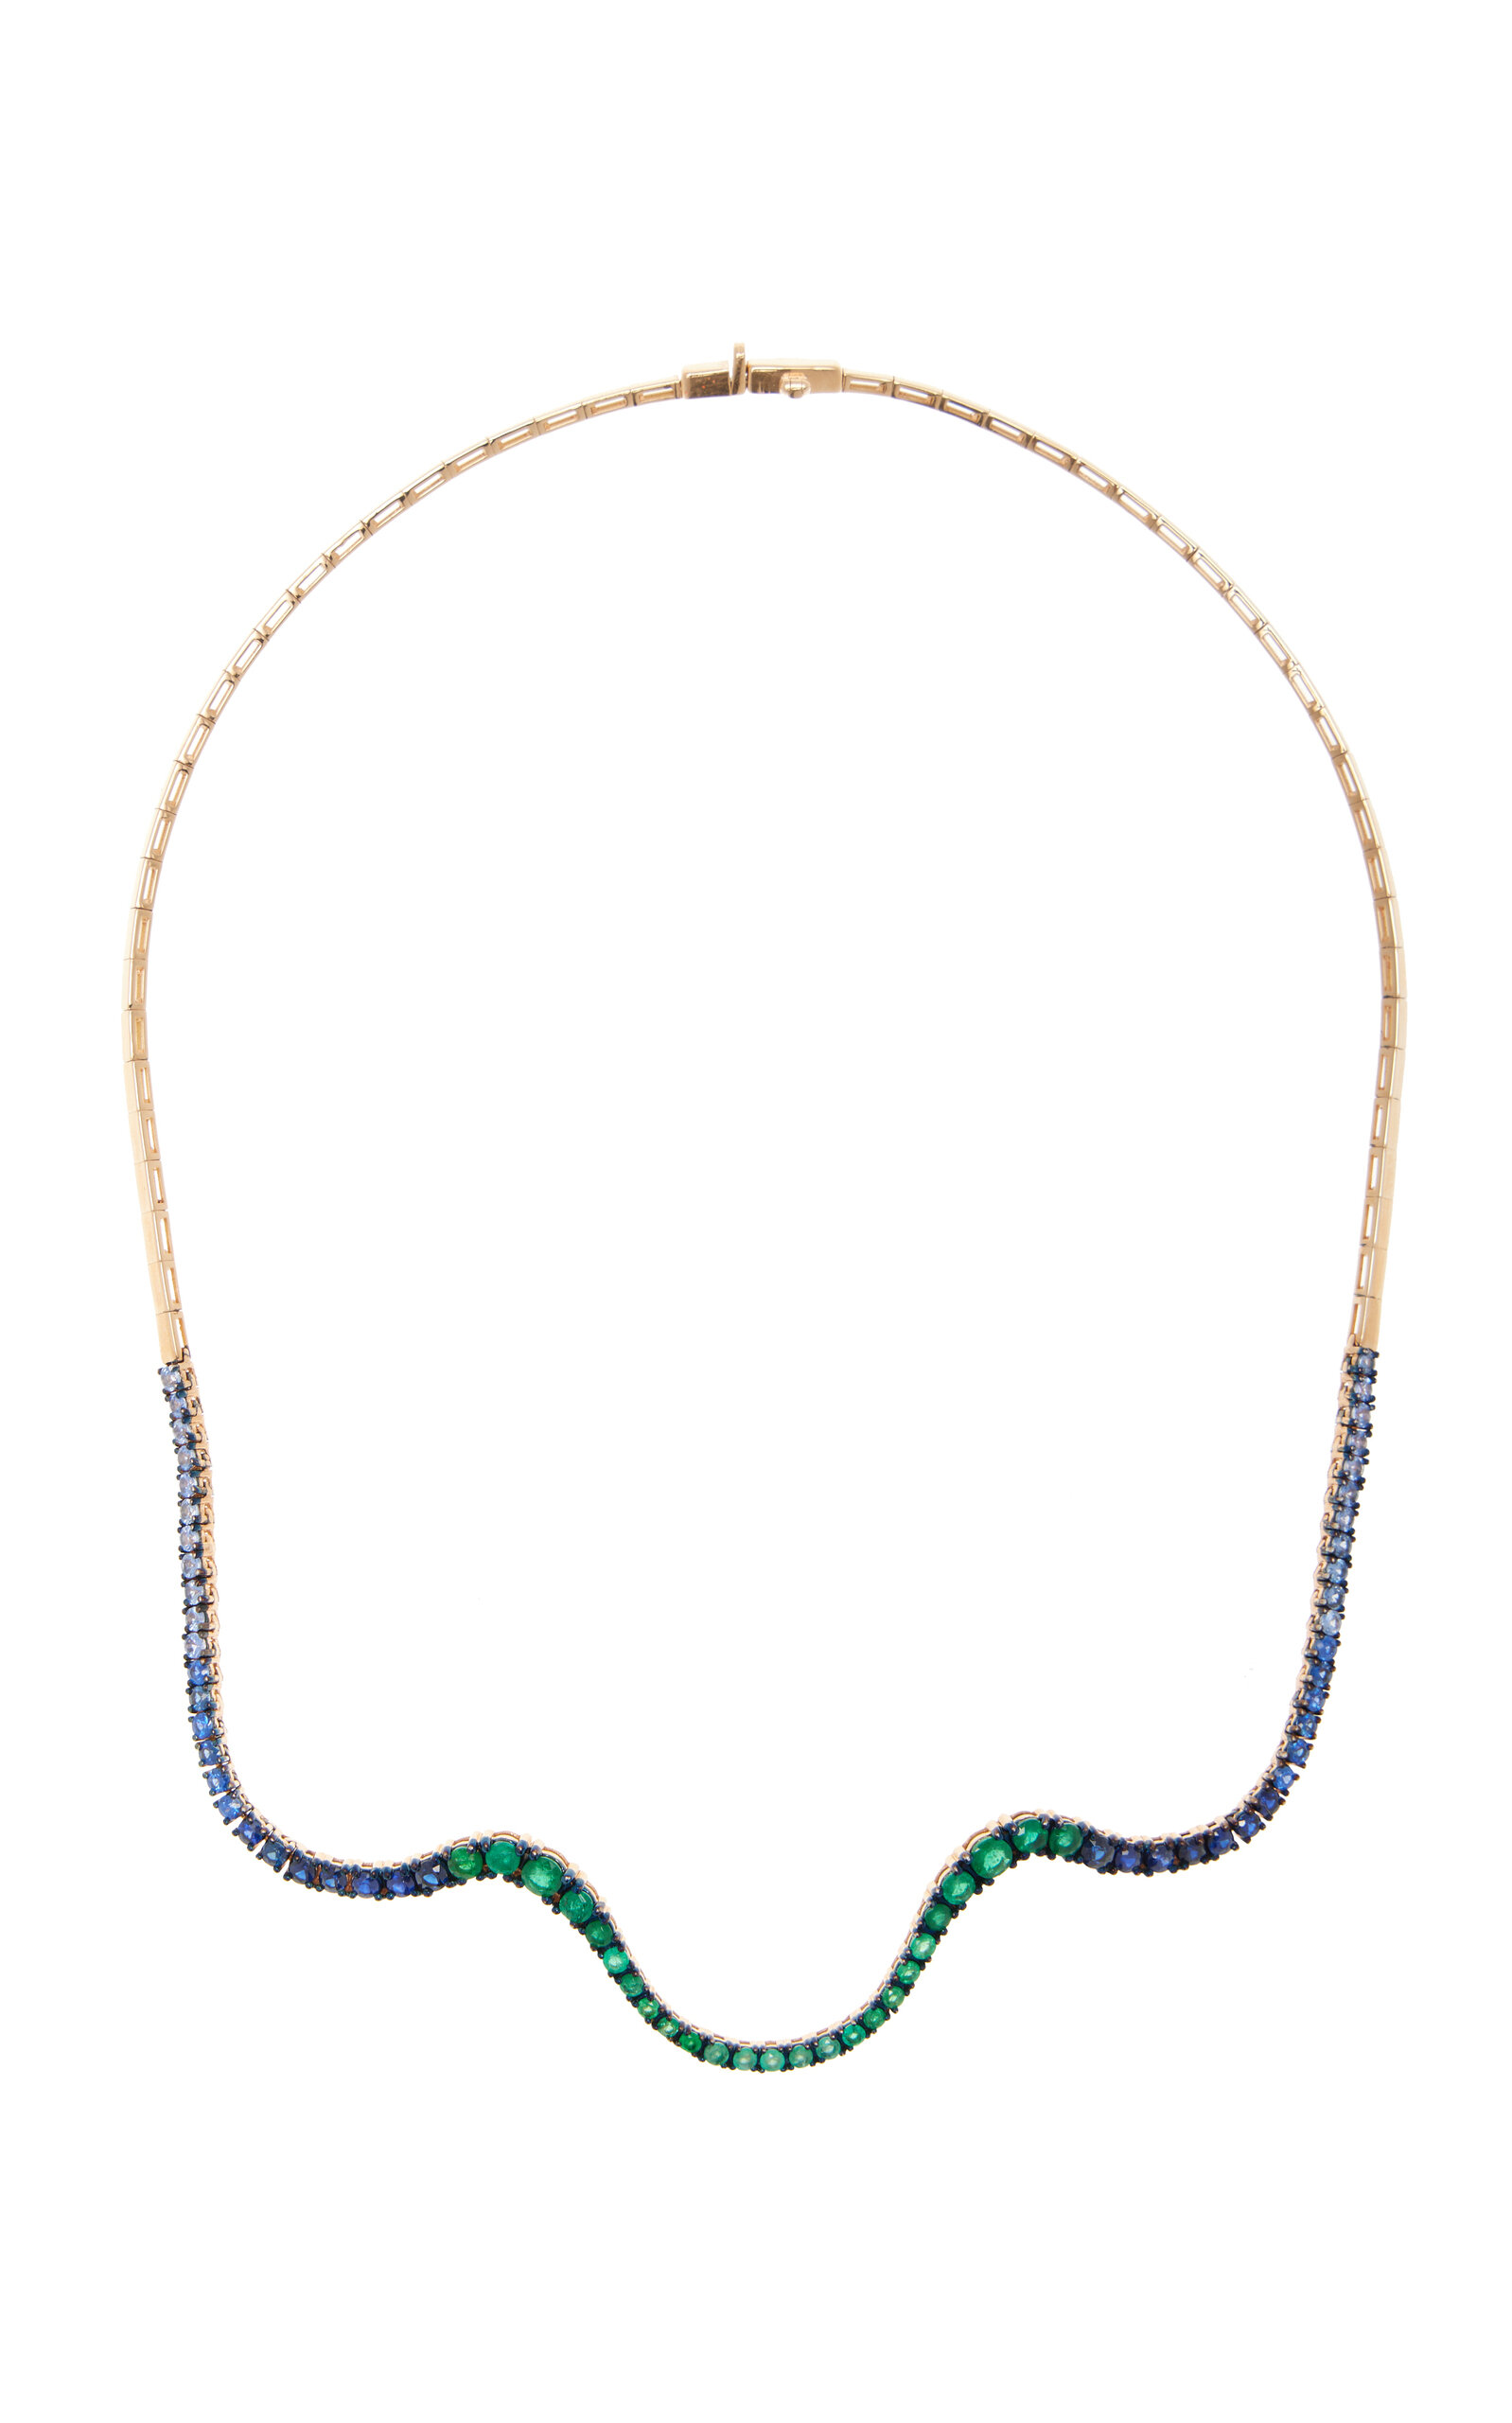 Radiant 18K Rose Gold Emerald And Sapphire Choker